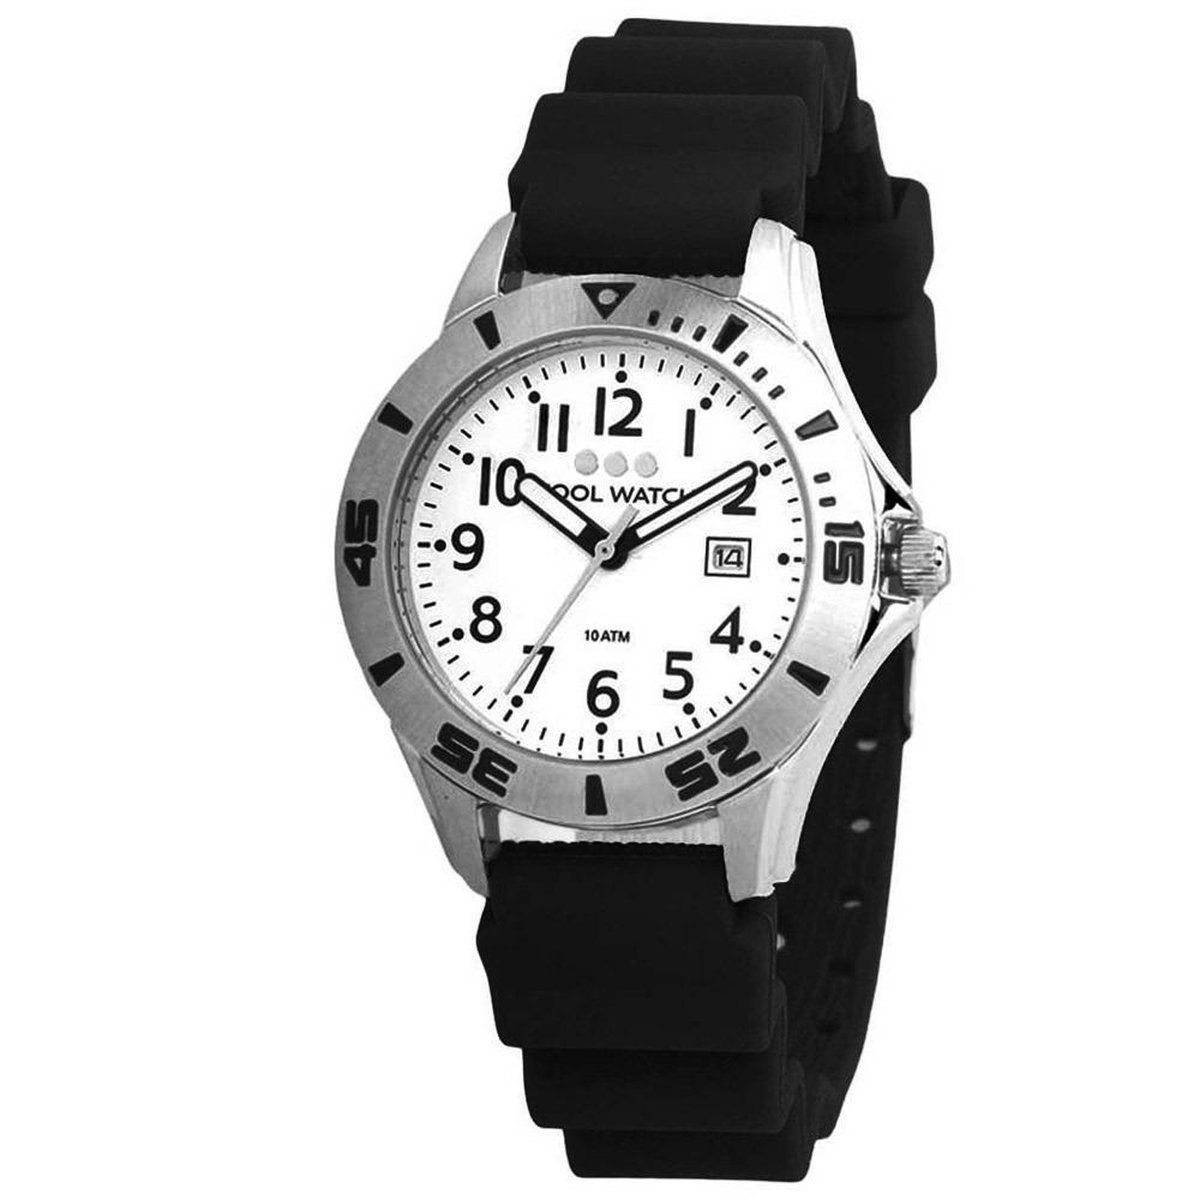 Coolwatch by Prisma Diver Kids horloge CW.202